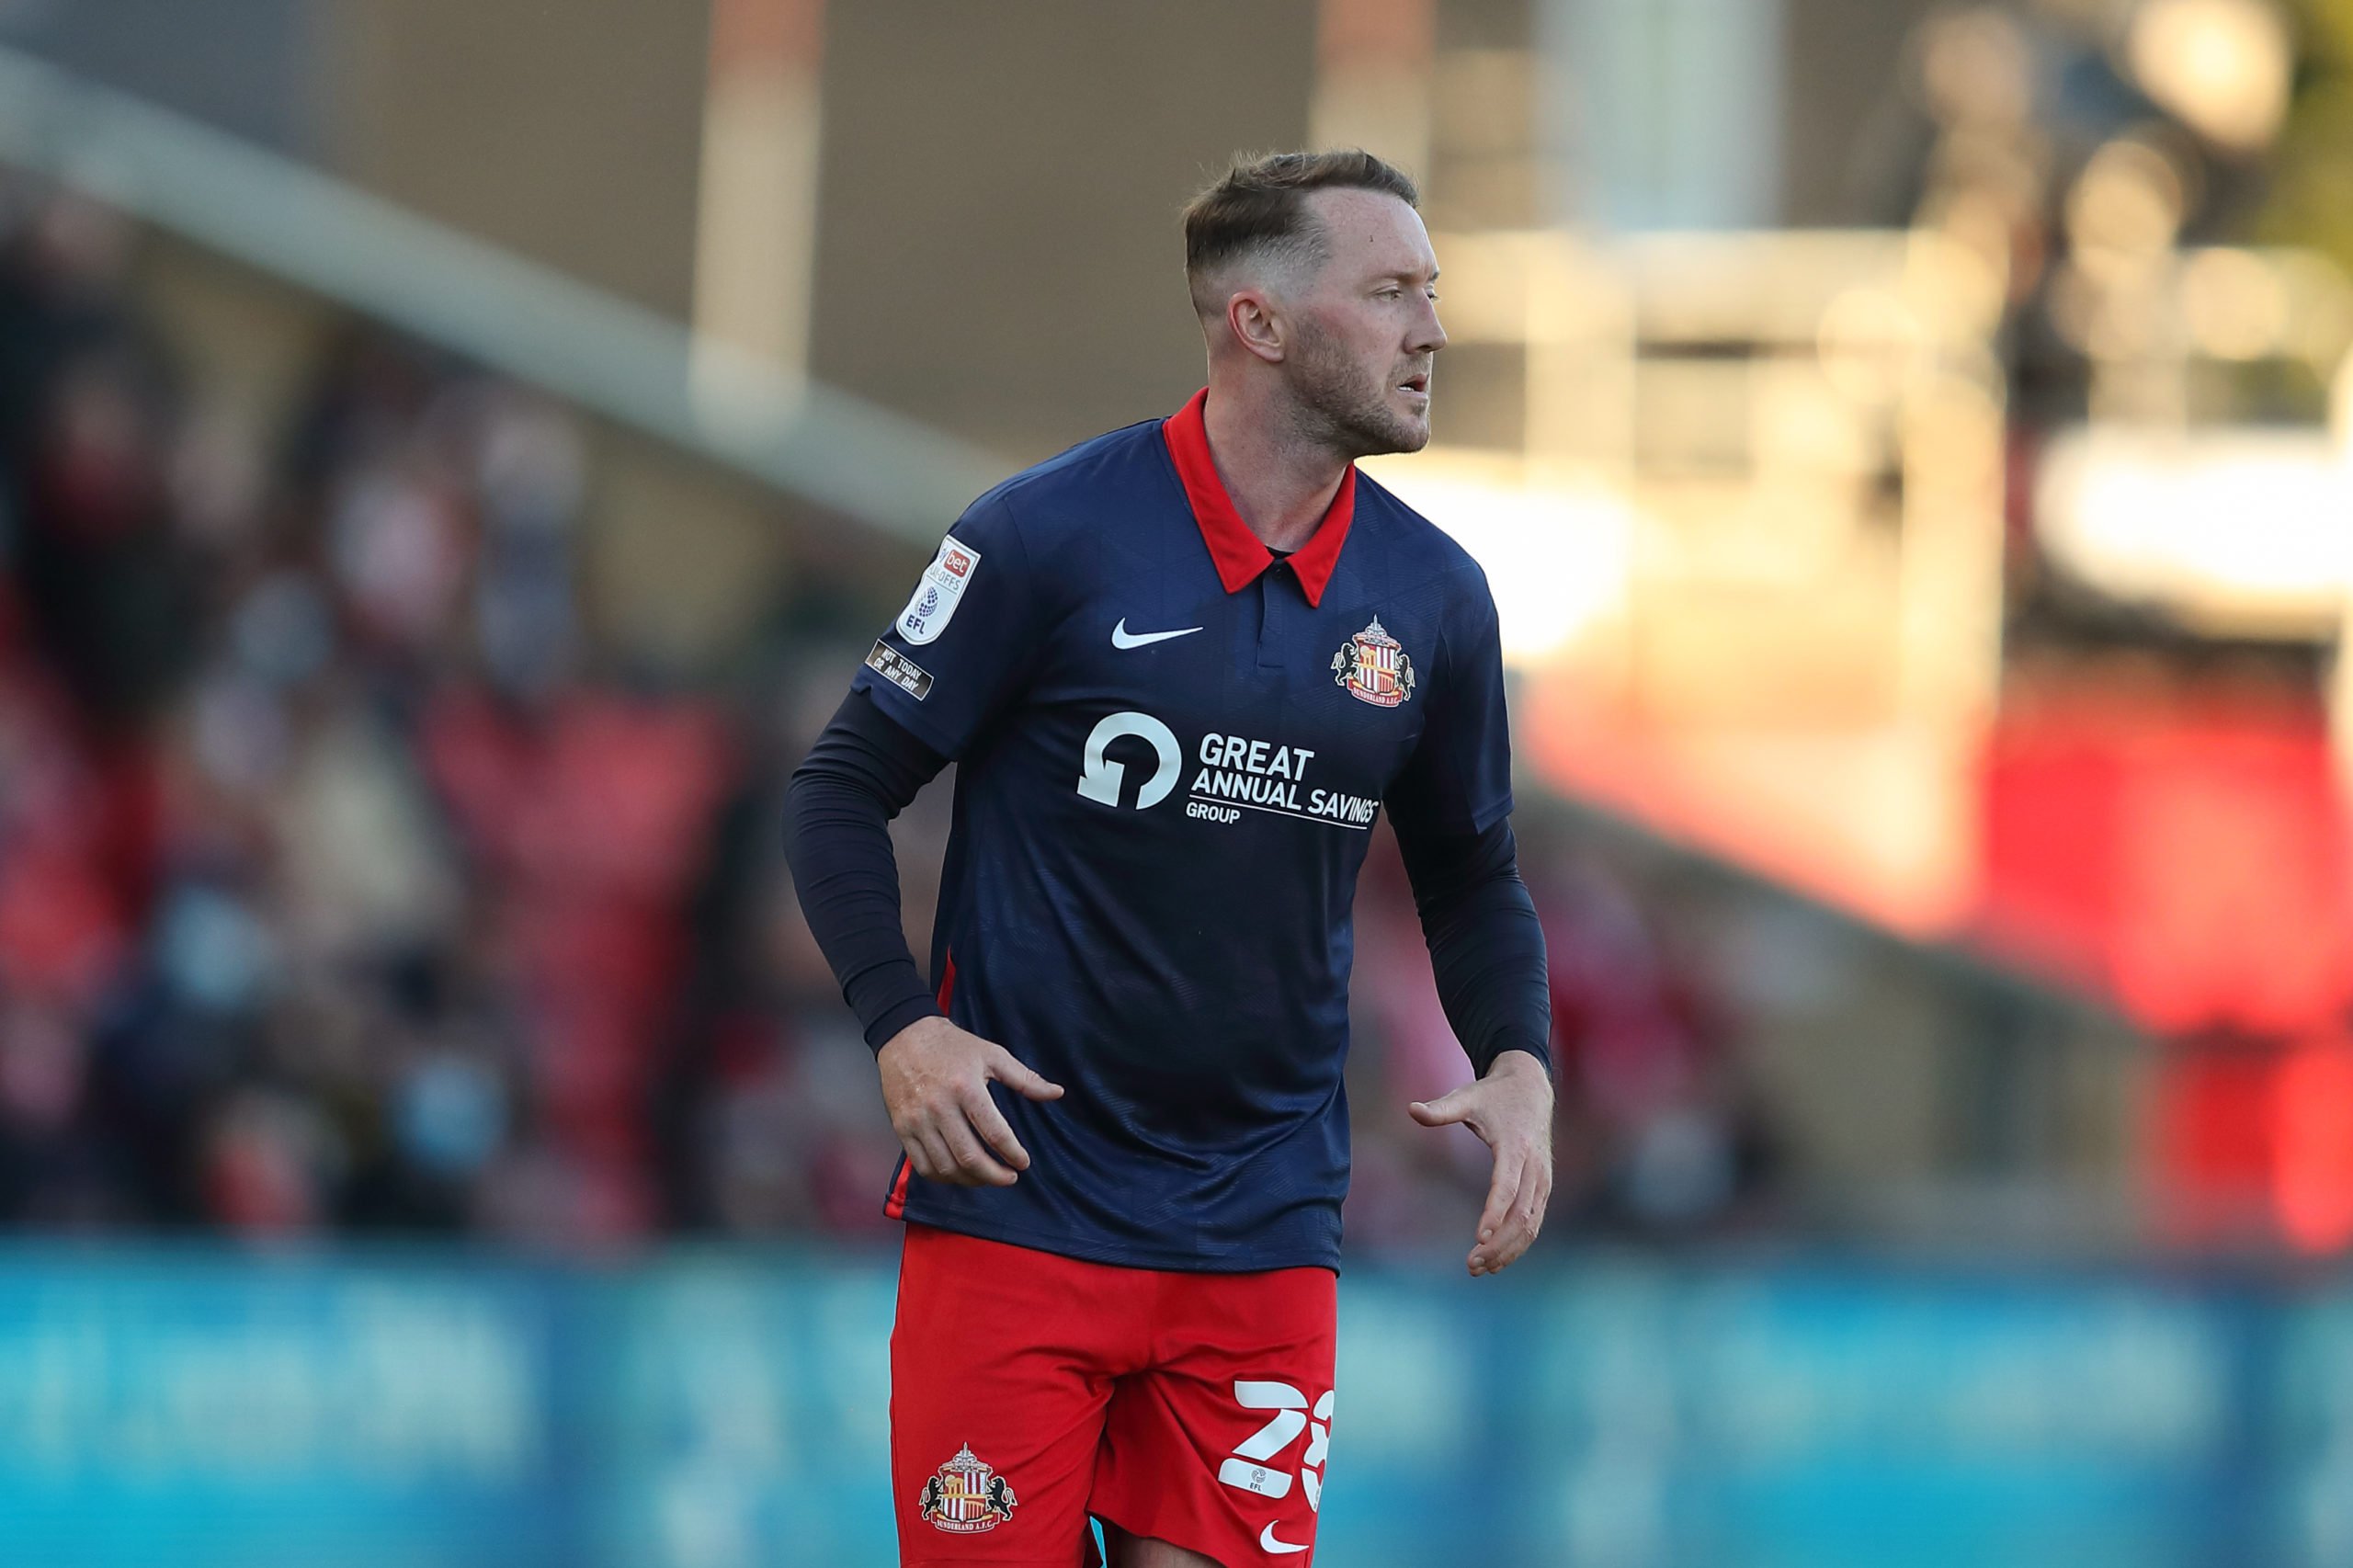 "Top human"; former Celtic star Aiden McGeady's contract gesture